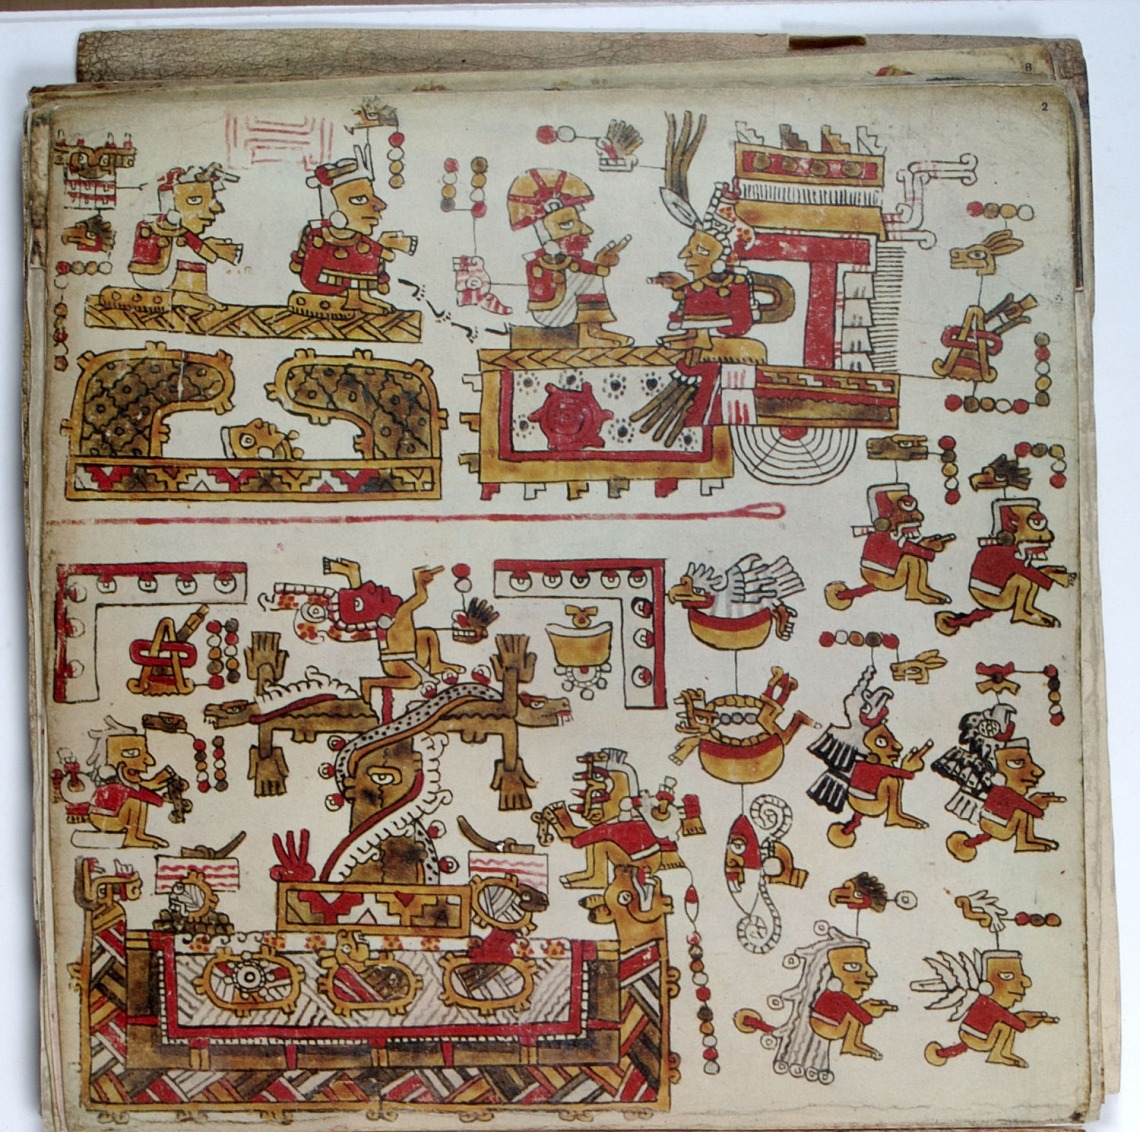 A page from the Codex Cospi